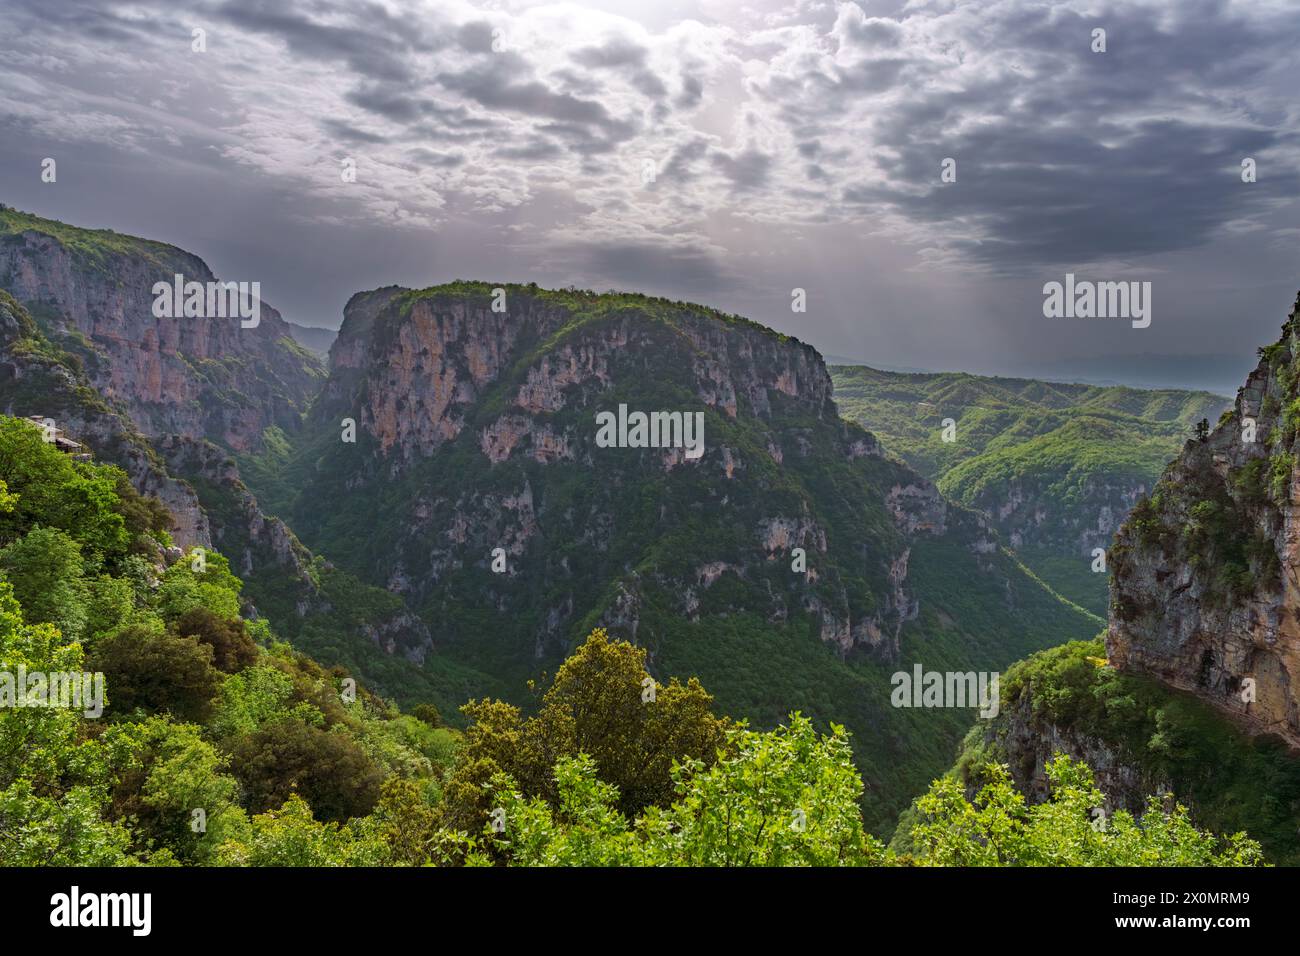 A natural landscape featuring a valley surrounded by mountainous landforms, trees, and a cloudy sky with cumulus formations in the background Stock Photo